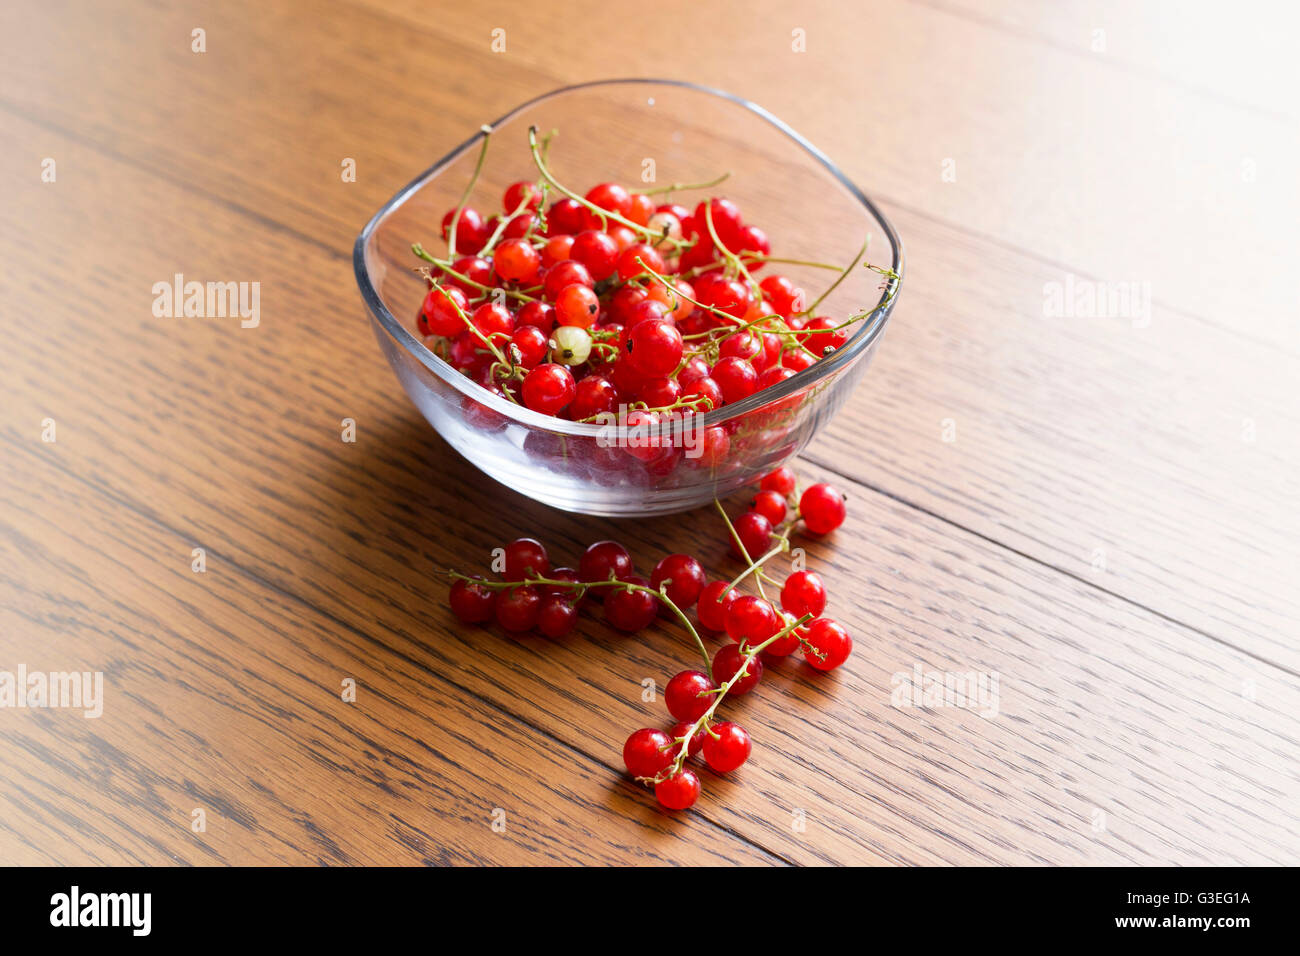 red currants Stock Photo